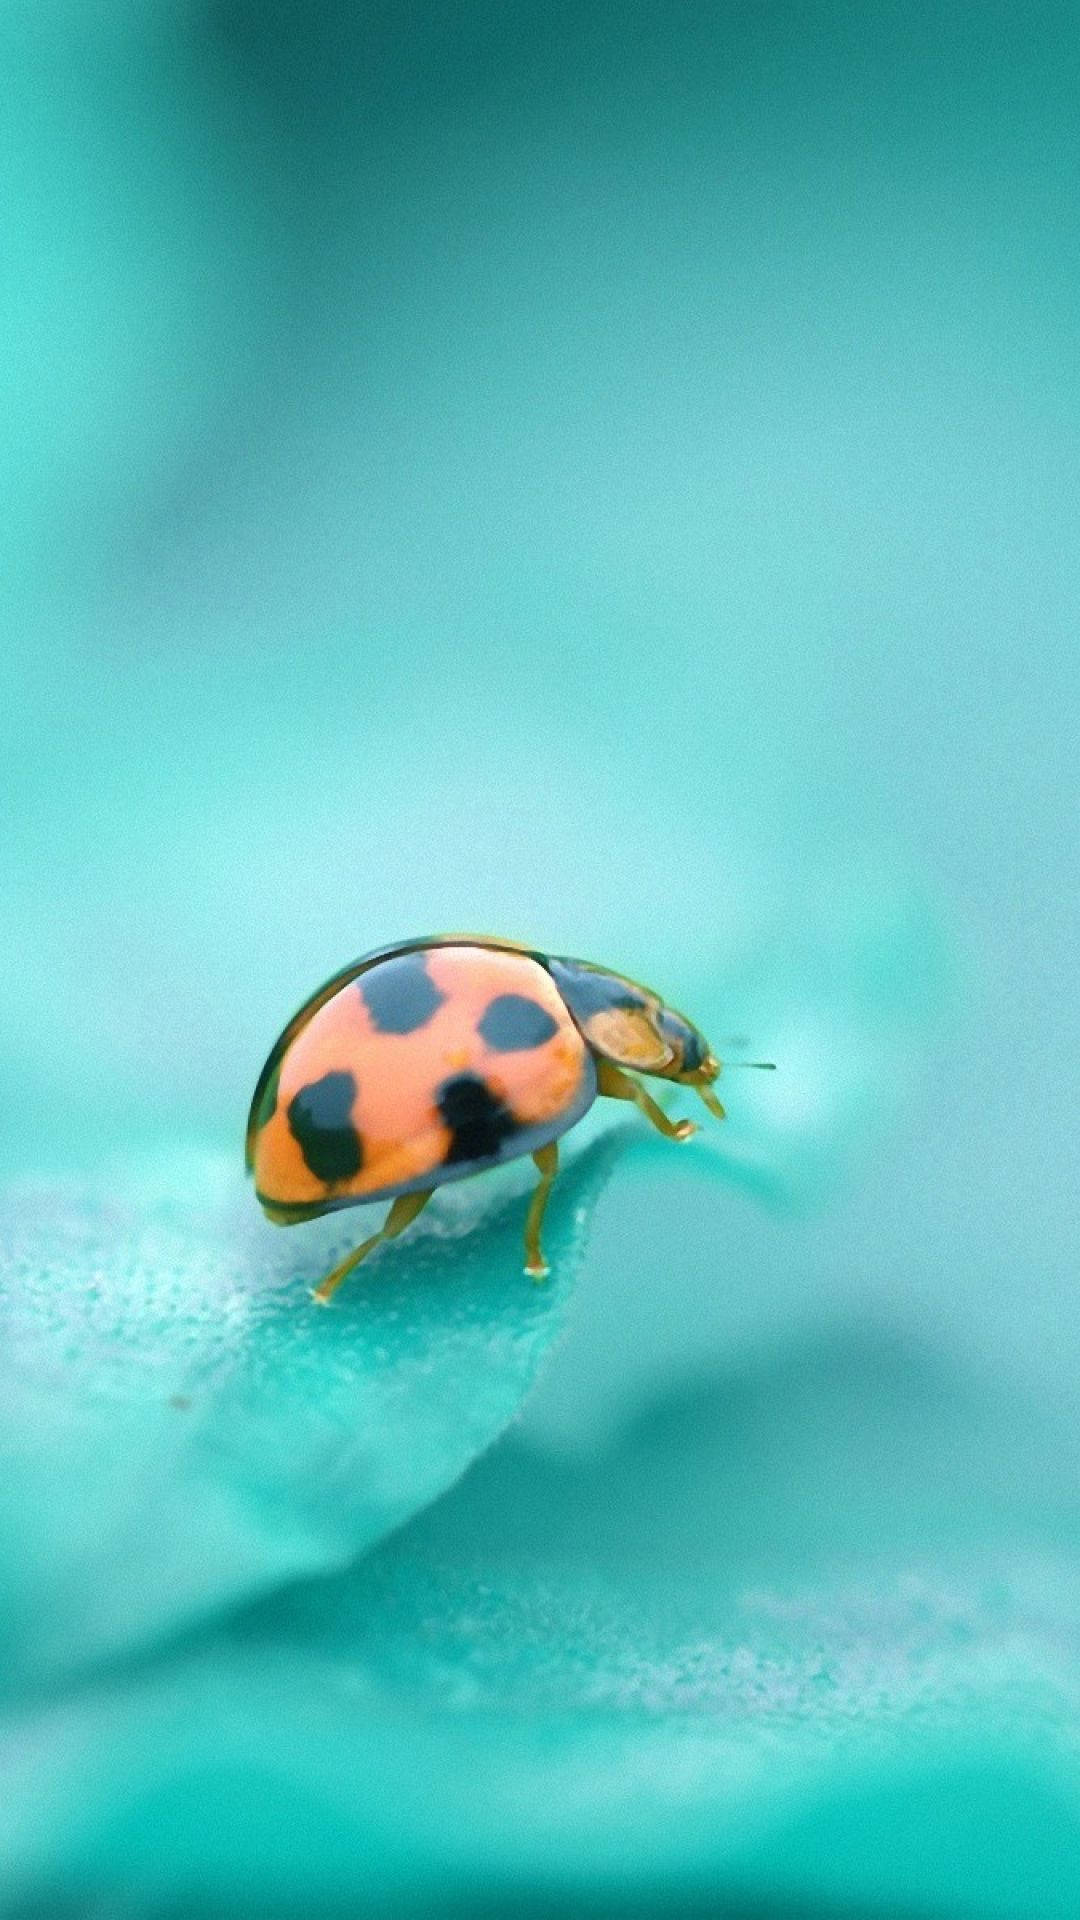 Ladybug With Red Dome-shaped Body Wallpaper